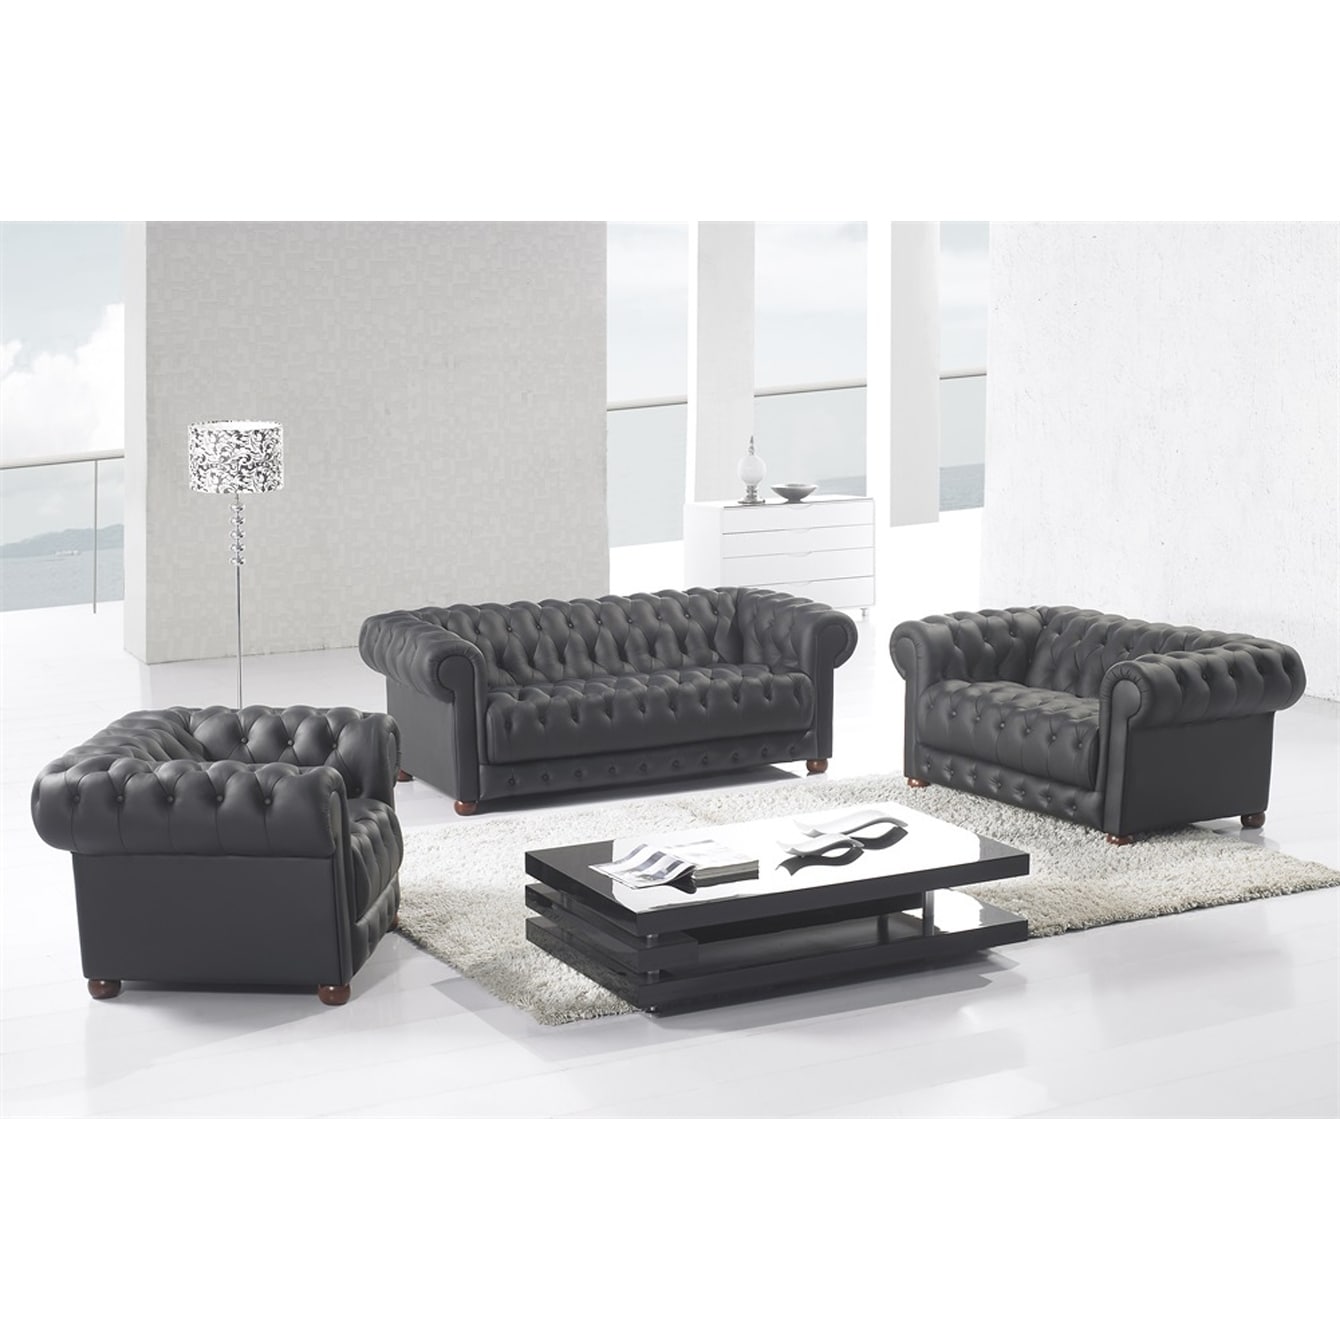 Matte Black Modern Contemporary Real Leather Configurable Living